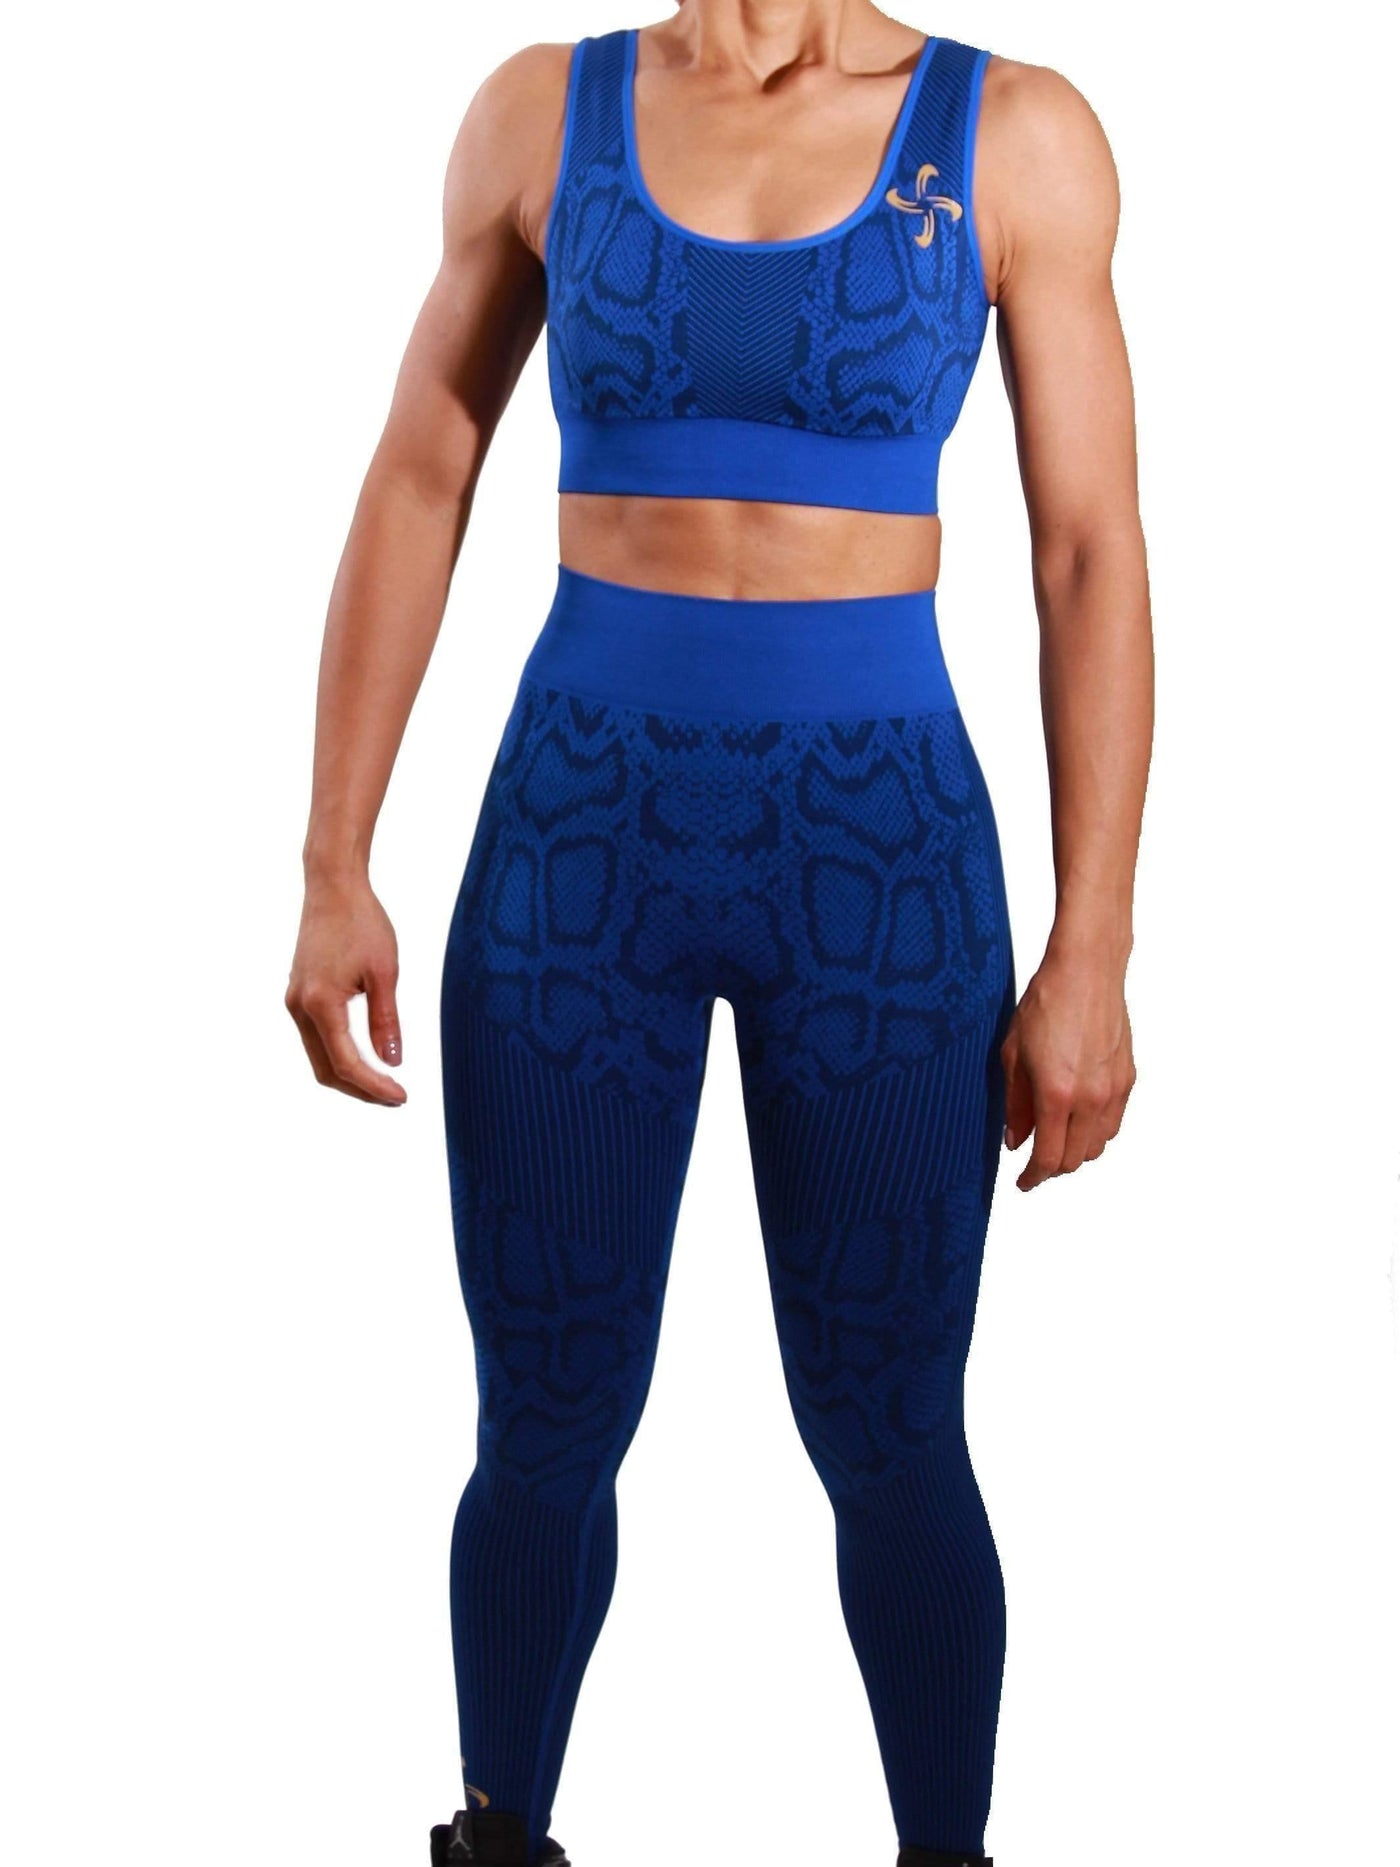 Explicit Energy | Seamless Activewear Set Blue SIZE SMALL - Statement Piece NY _tab_size-chart, Activewear, Activewear & Loungewear, Blue, Brooklyn Boutique, chic, clearance, final sale, leggings, Lounge, misses, not clearance, padded sports bra, Set, Sets, Ships from USA, sports bra, squat proof, squat proof leggings, squatproof, Statement Clothing, statement lounge, statement piece, Statement Piece Boutique, statement piece ny, Statement Pieces, Statement Pieces Boutique, Women's Boutique Statement Lounge